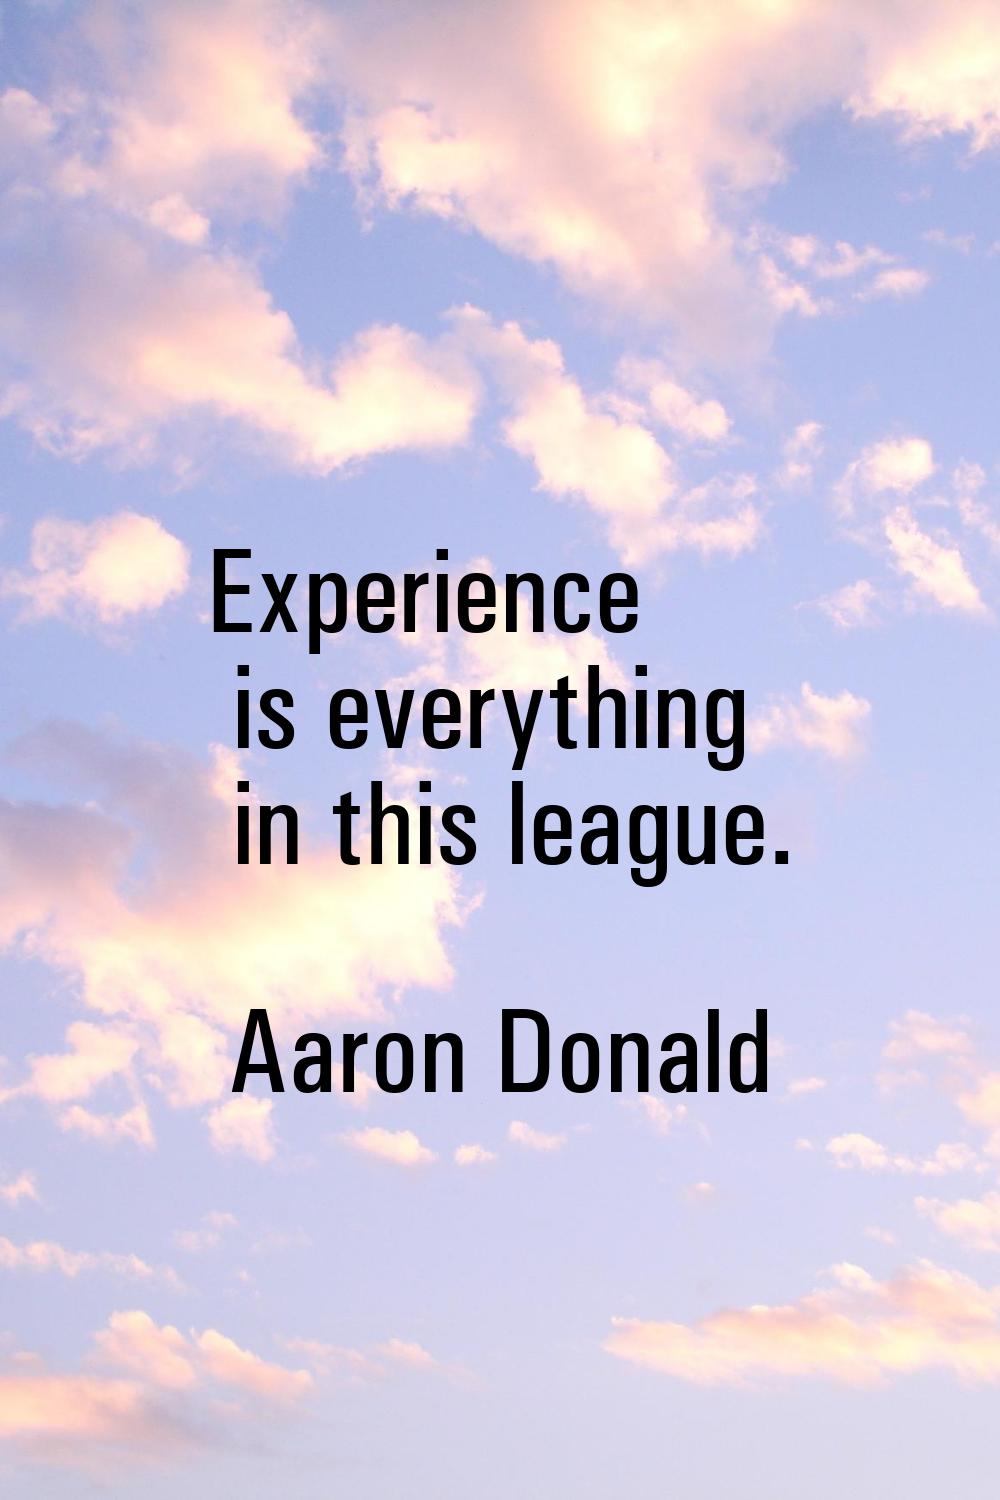 Experience is everything in this league.